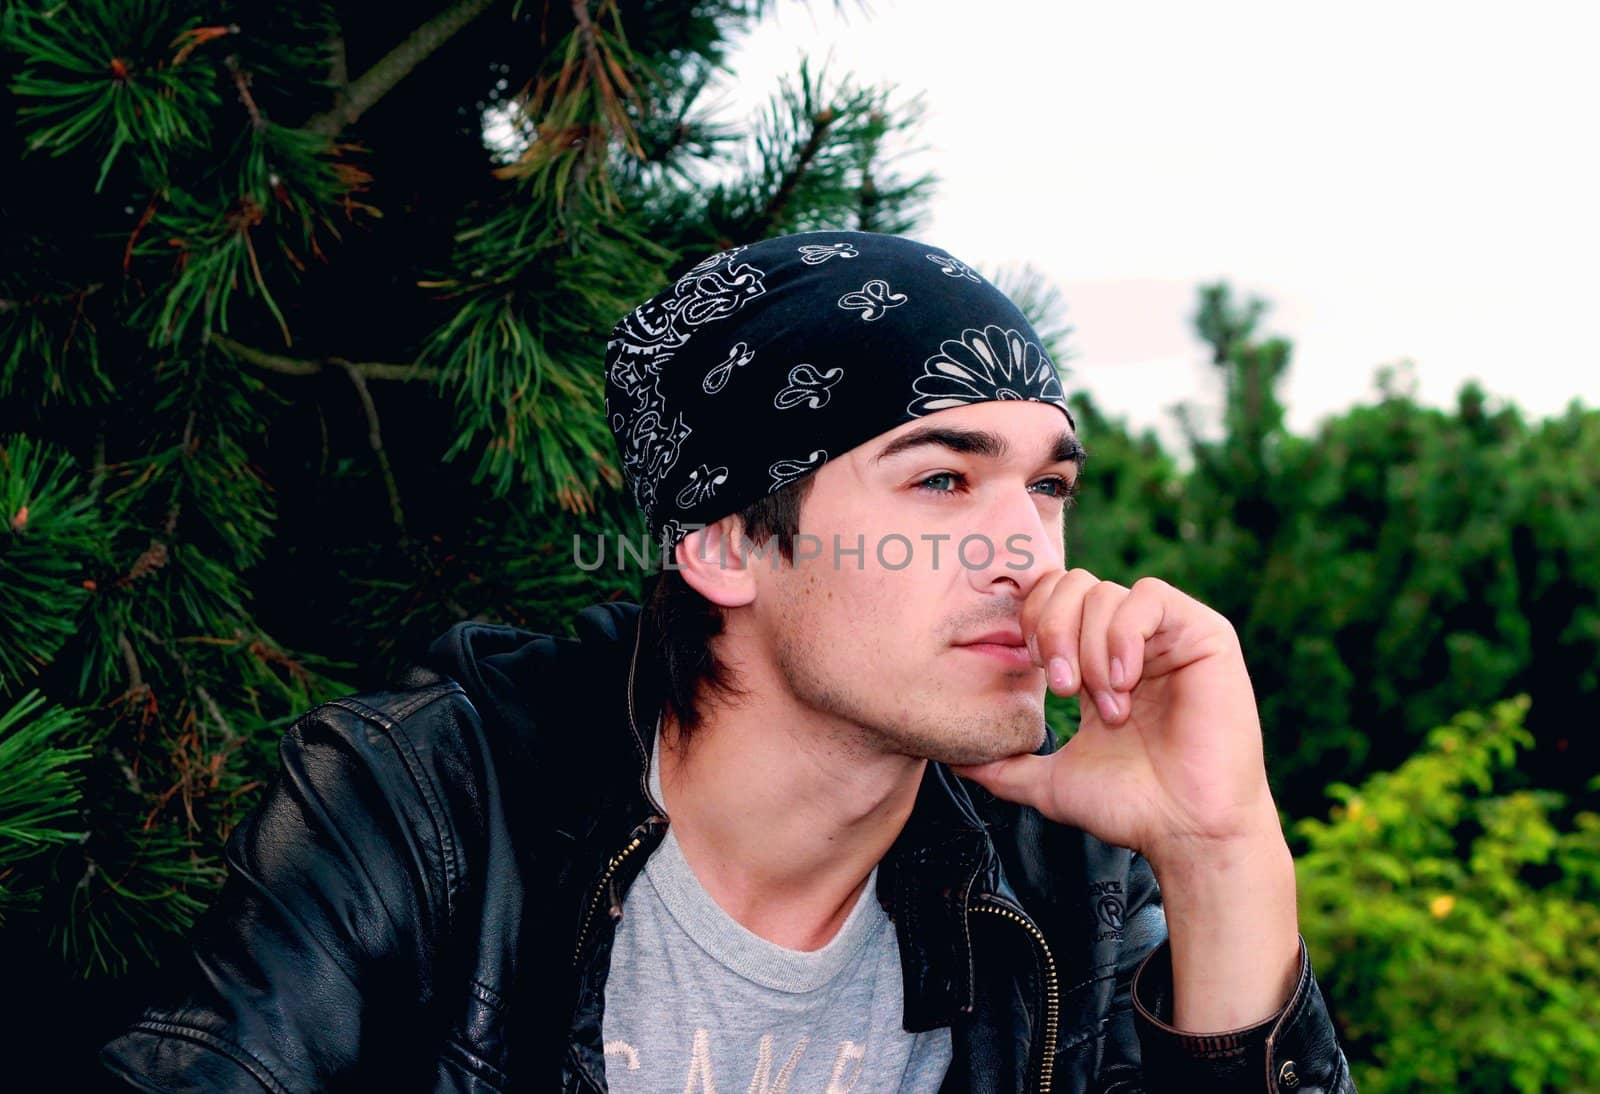 A handsome man in a bandana and a leather jacket in black with a hand from a person in thought